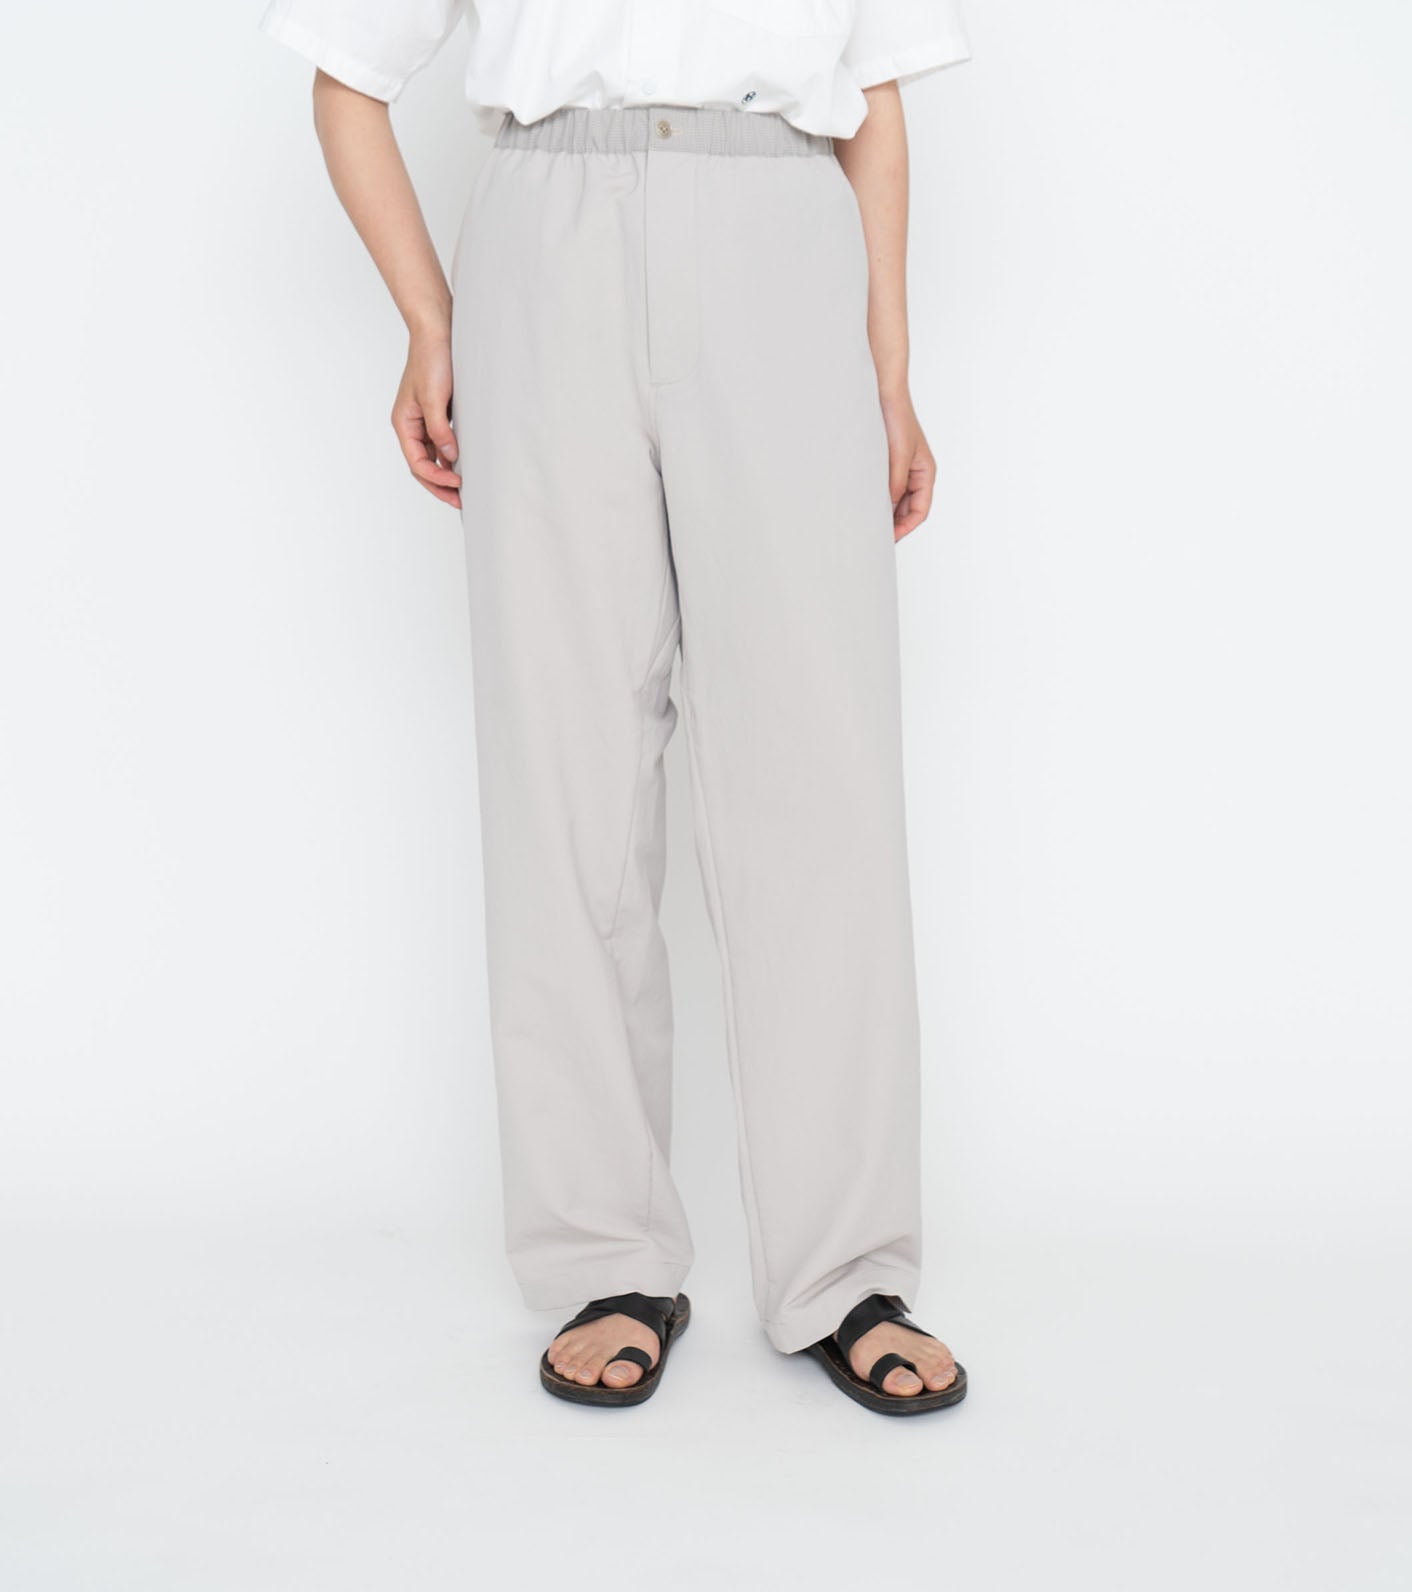 nanamica - Pant - Alphadry® - Wide Easy Pant - Pale Gray